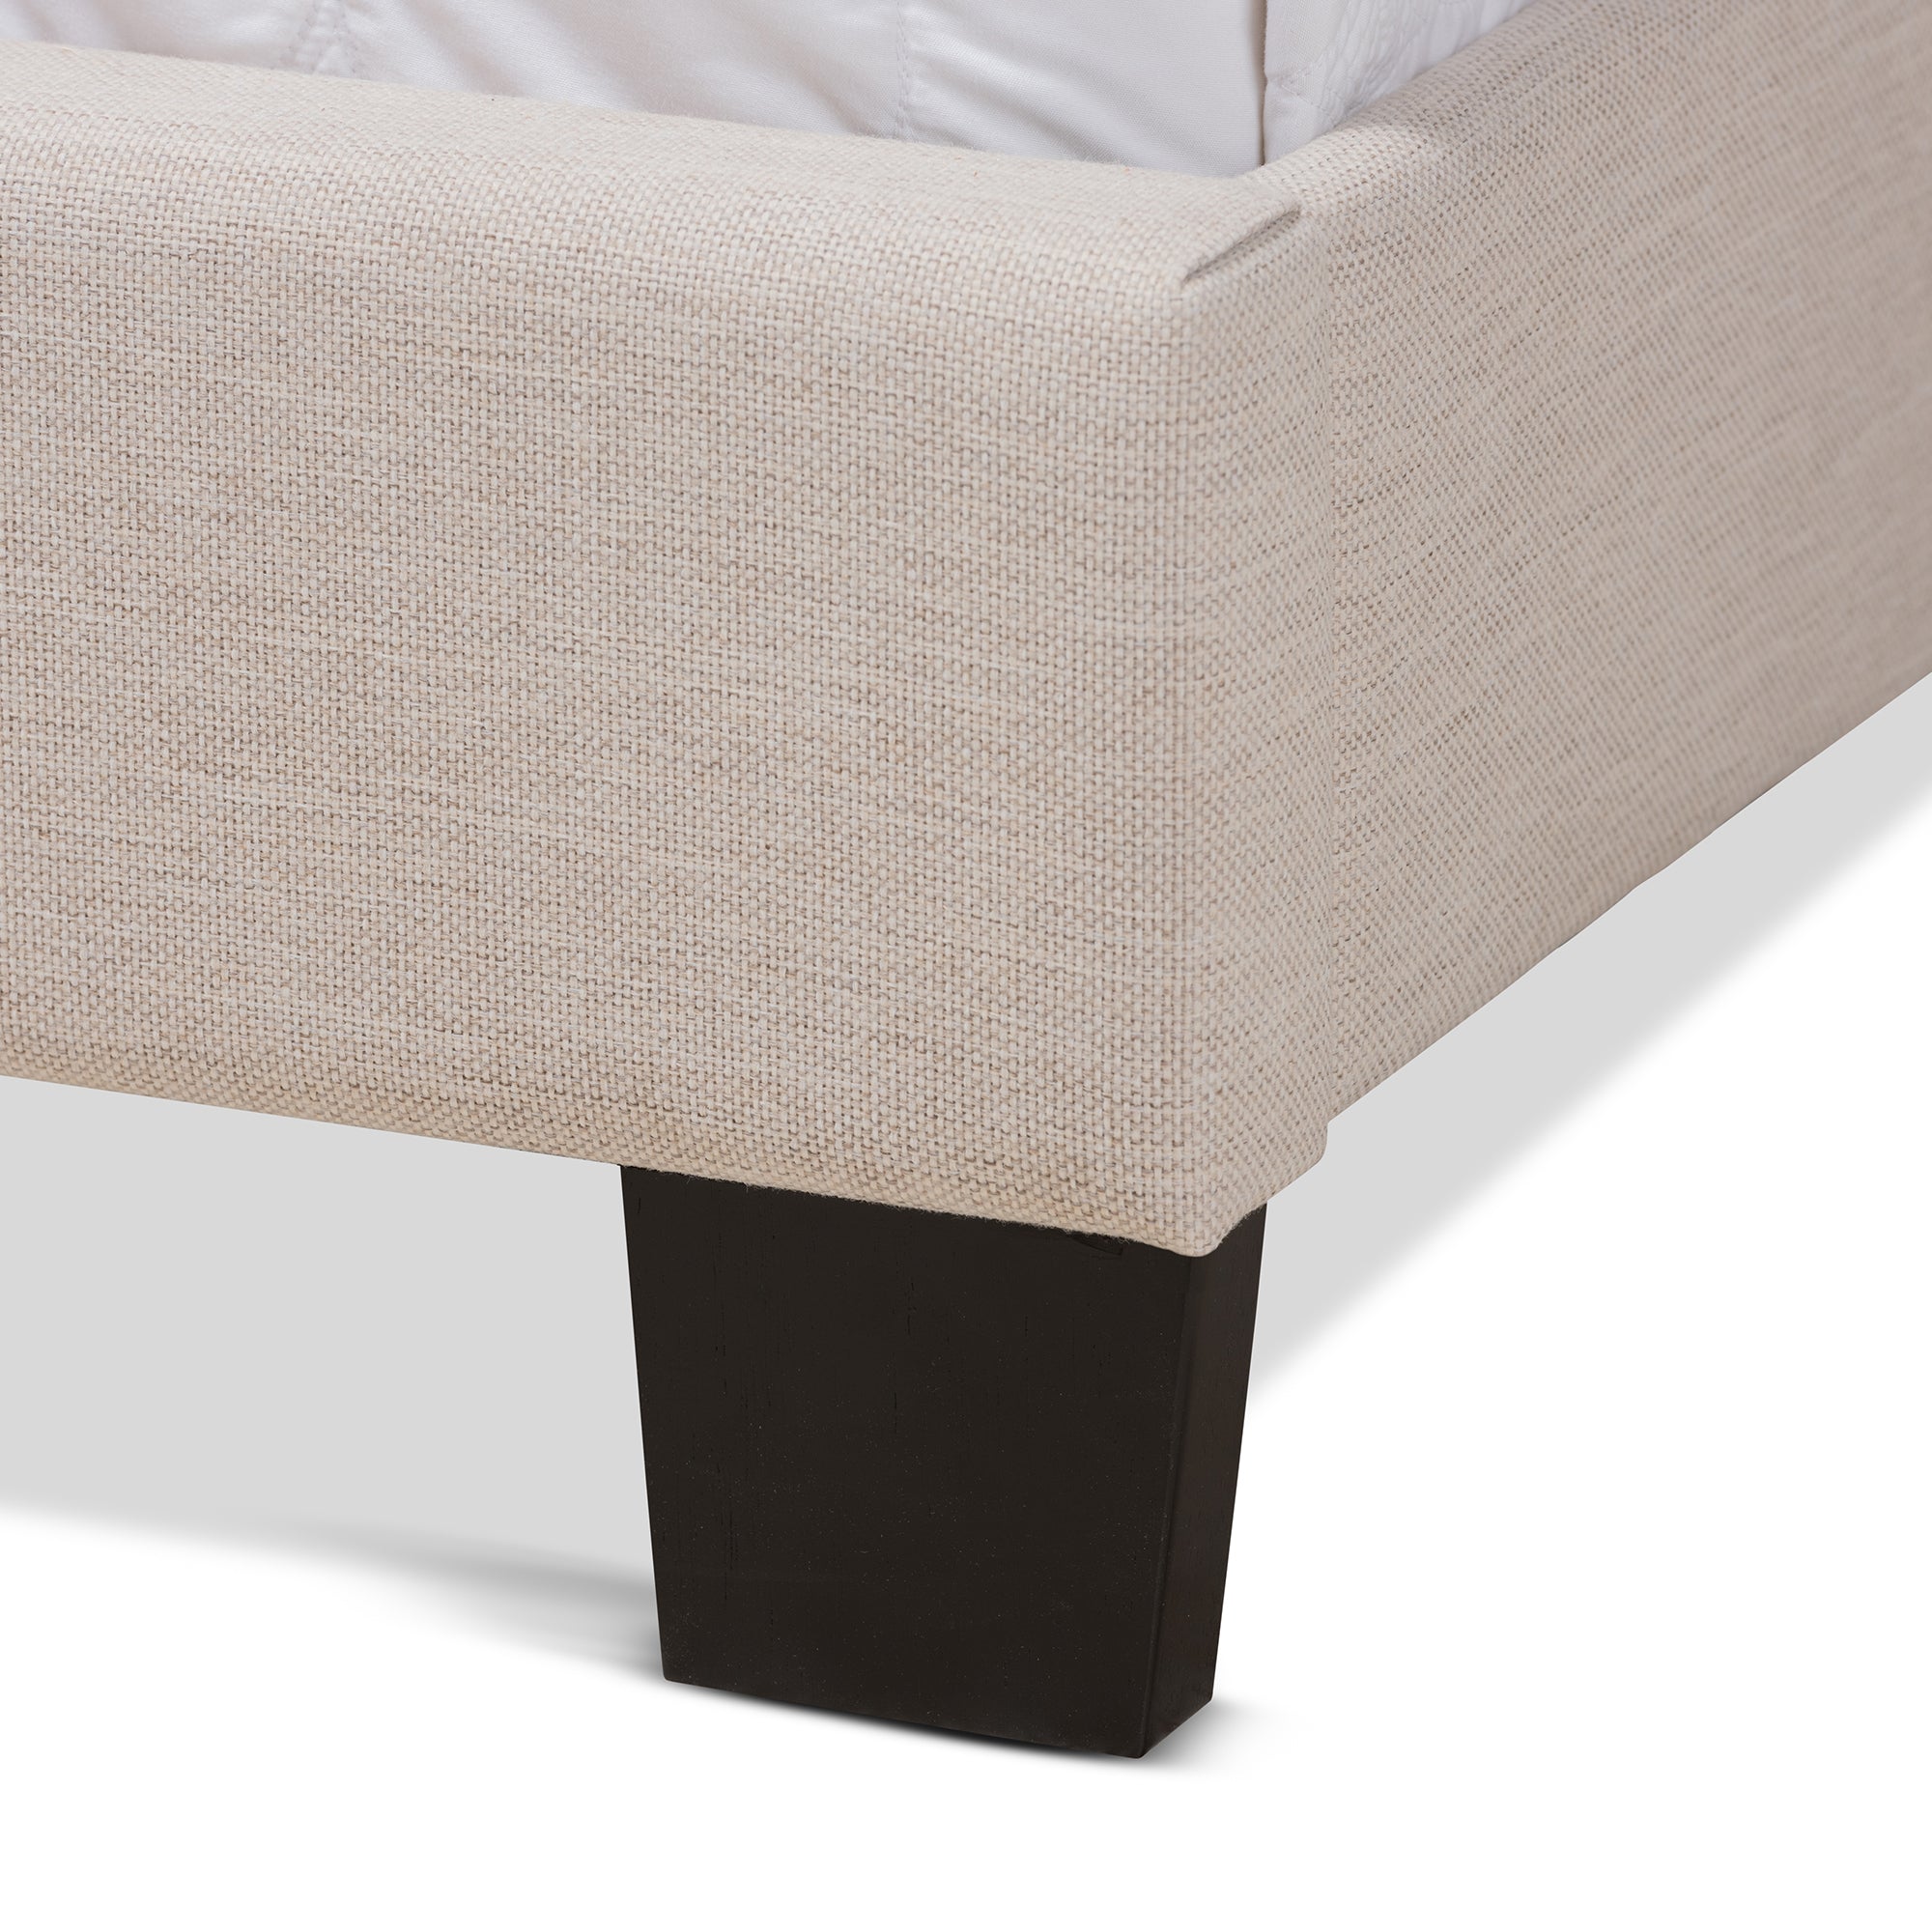 Lisette Contemporary Bed-Bed-Baxton Studio - WI-Wall2Wall Furnishings